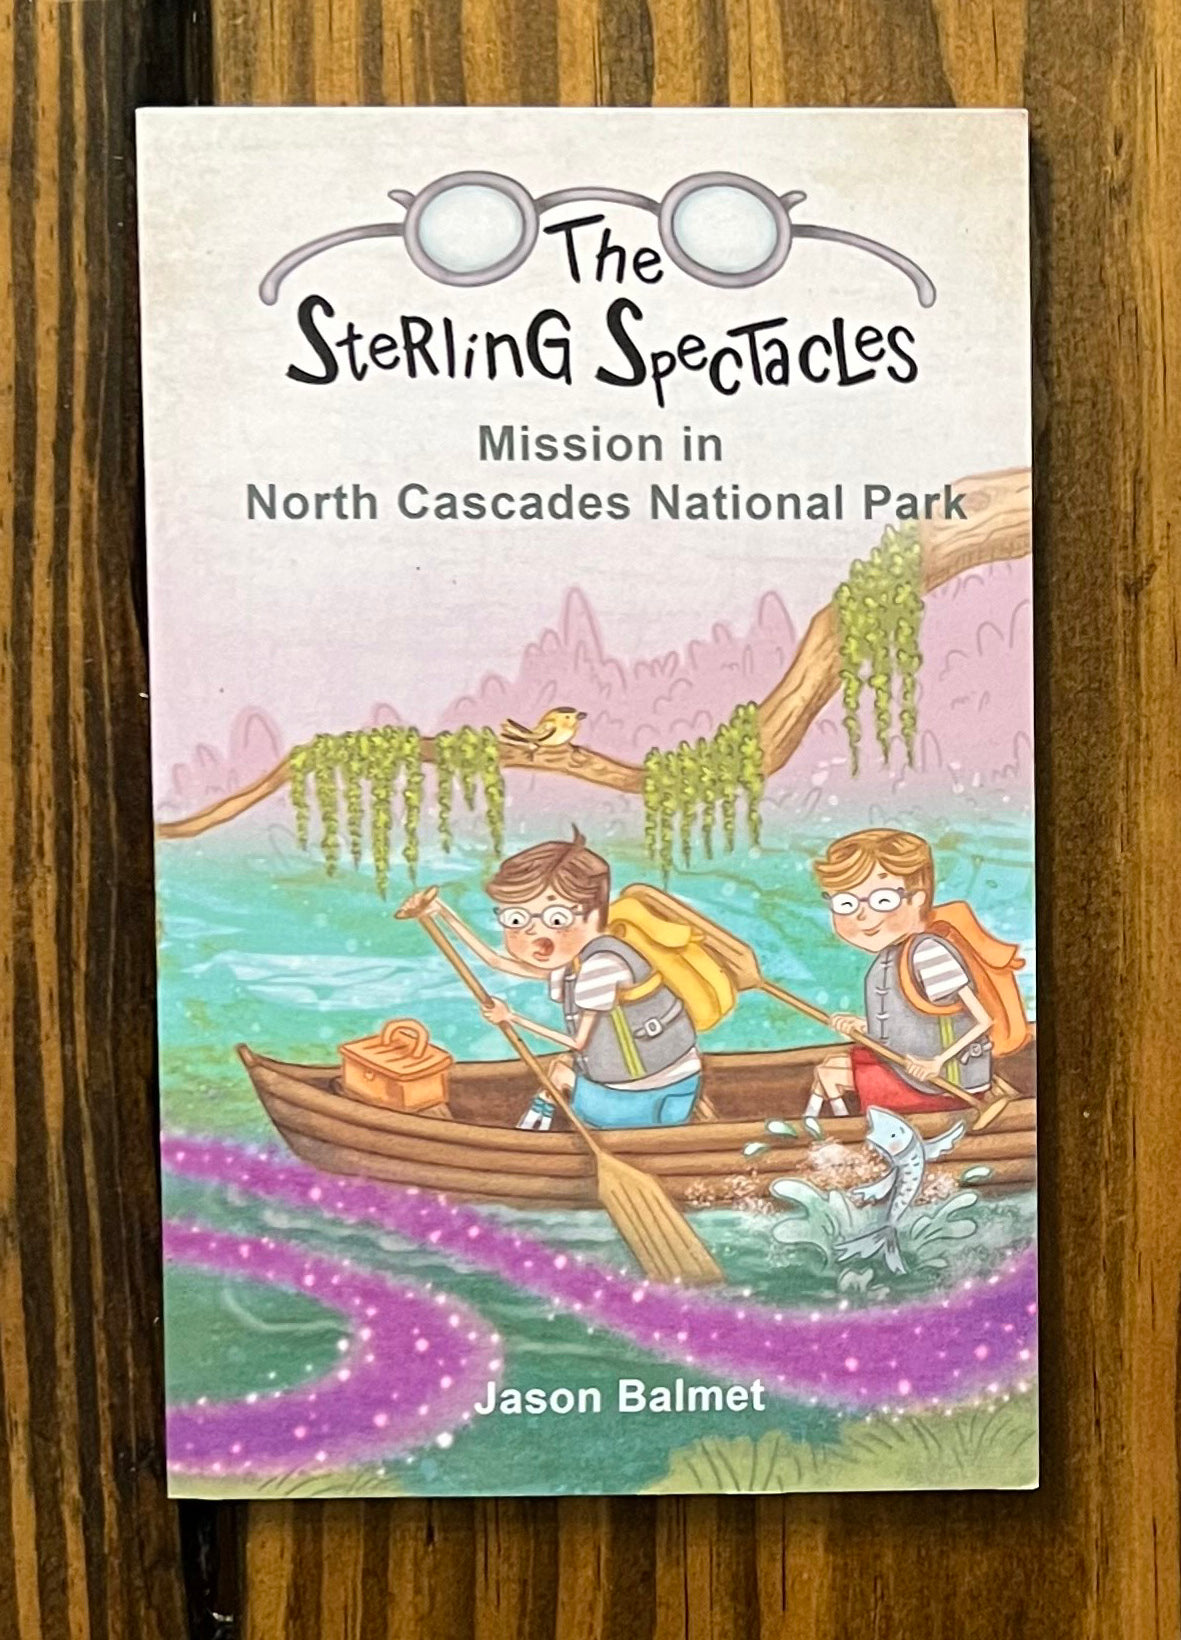 Book #4: Mission in North Cascades National Park - PRINT